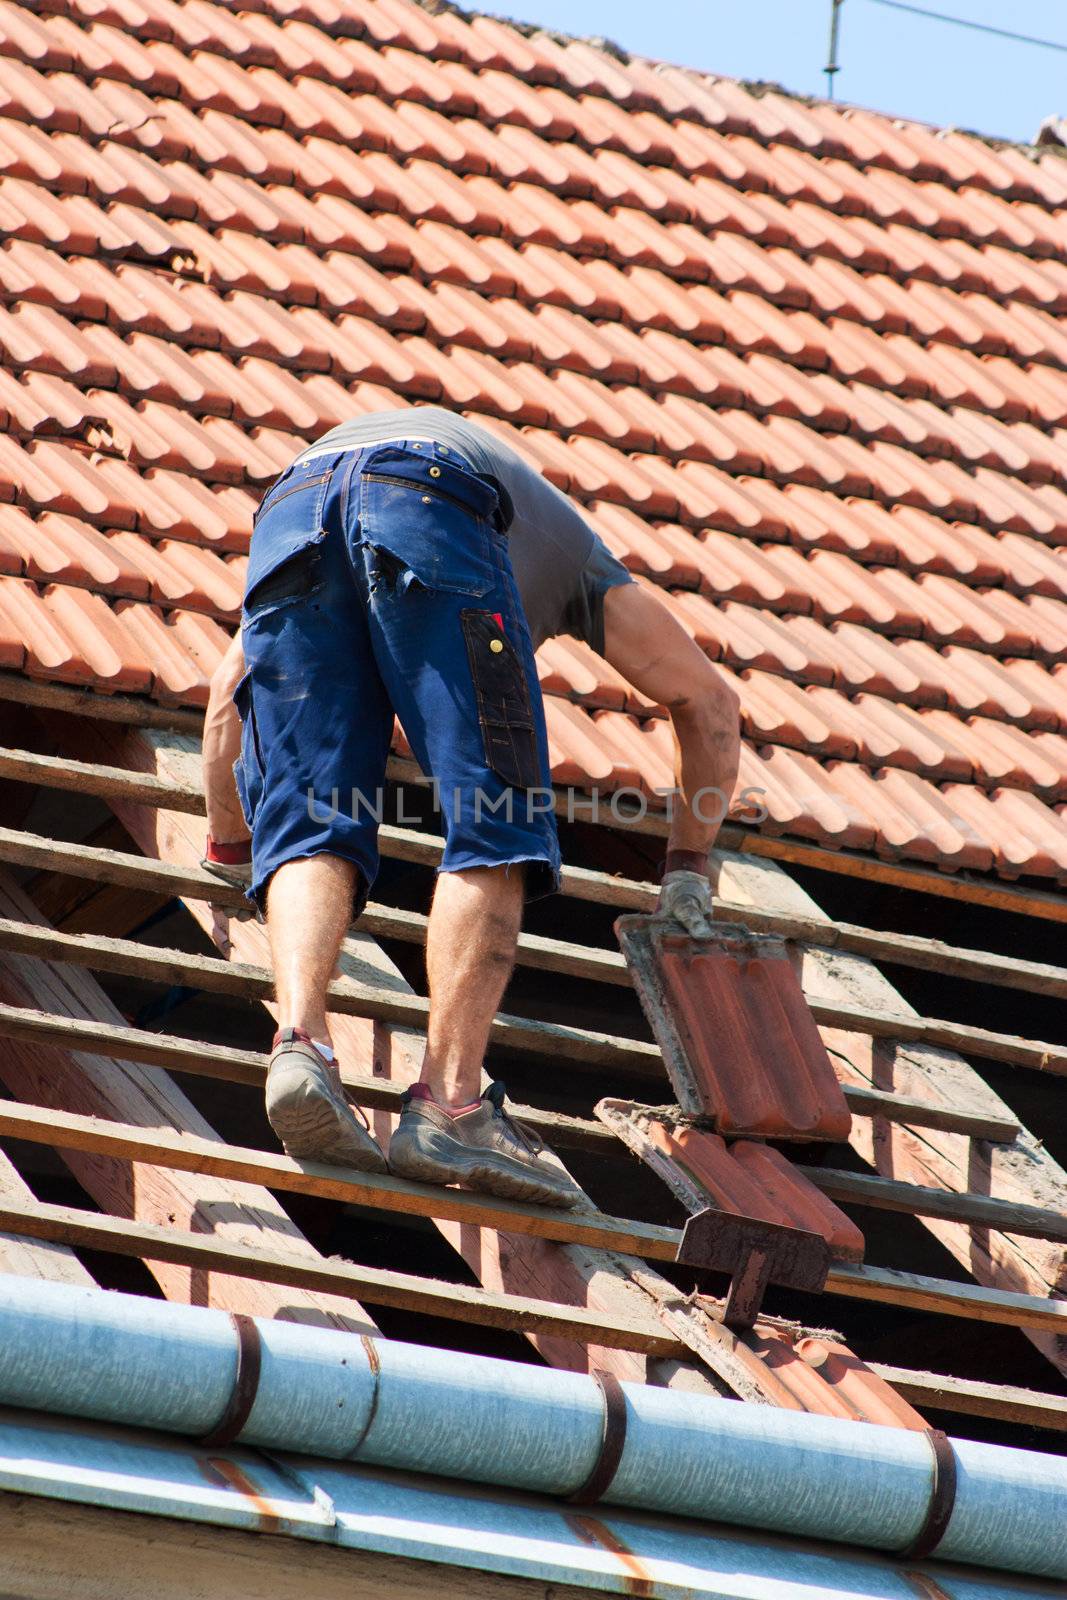 Man working in the roof of a building